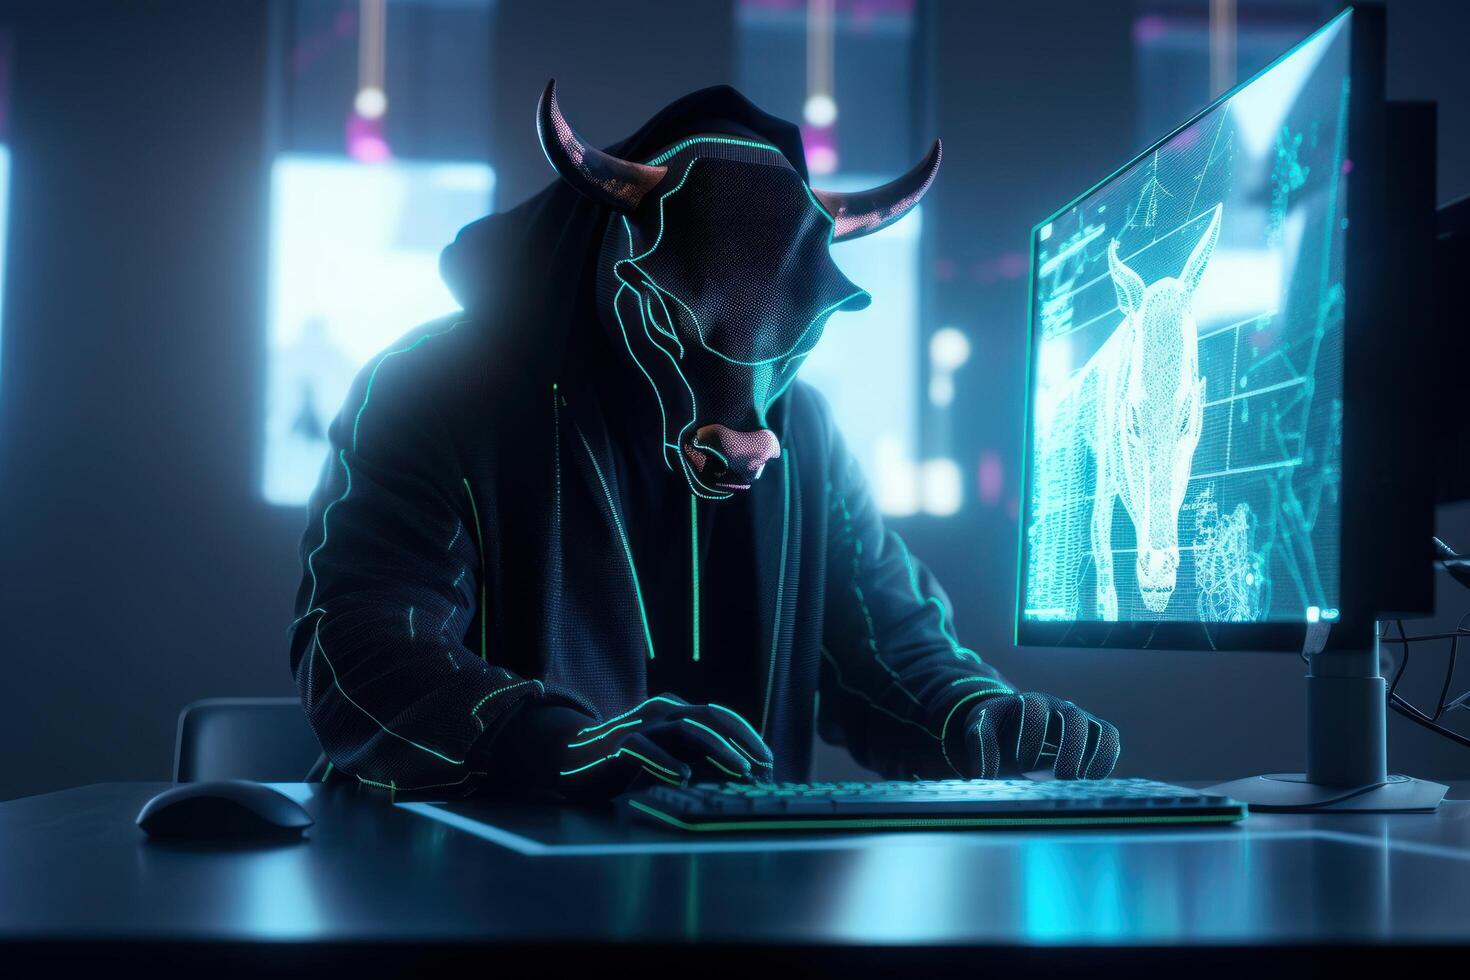 Bull trading with computer with graph on screen, Bullish in Stock market and Crypto currency. Created photo